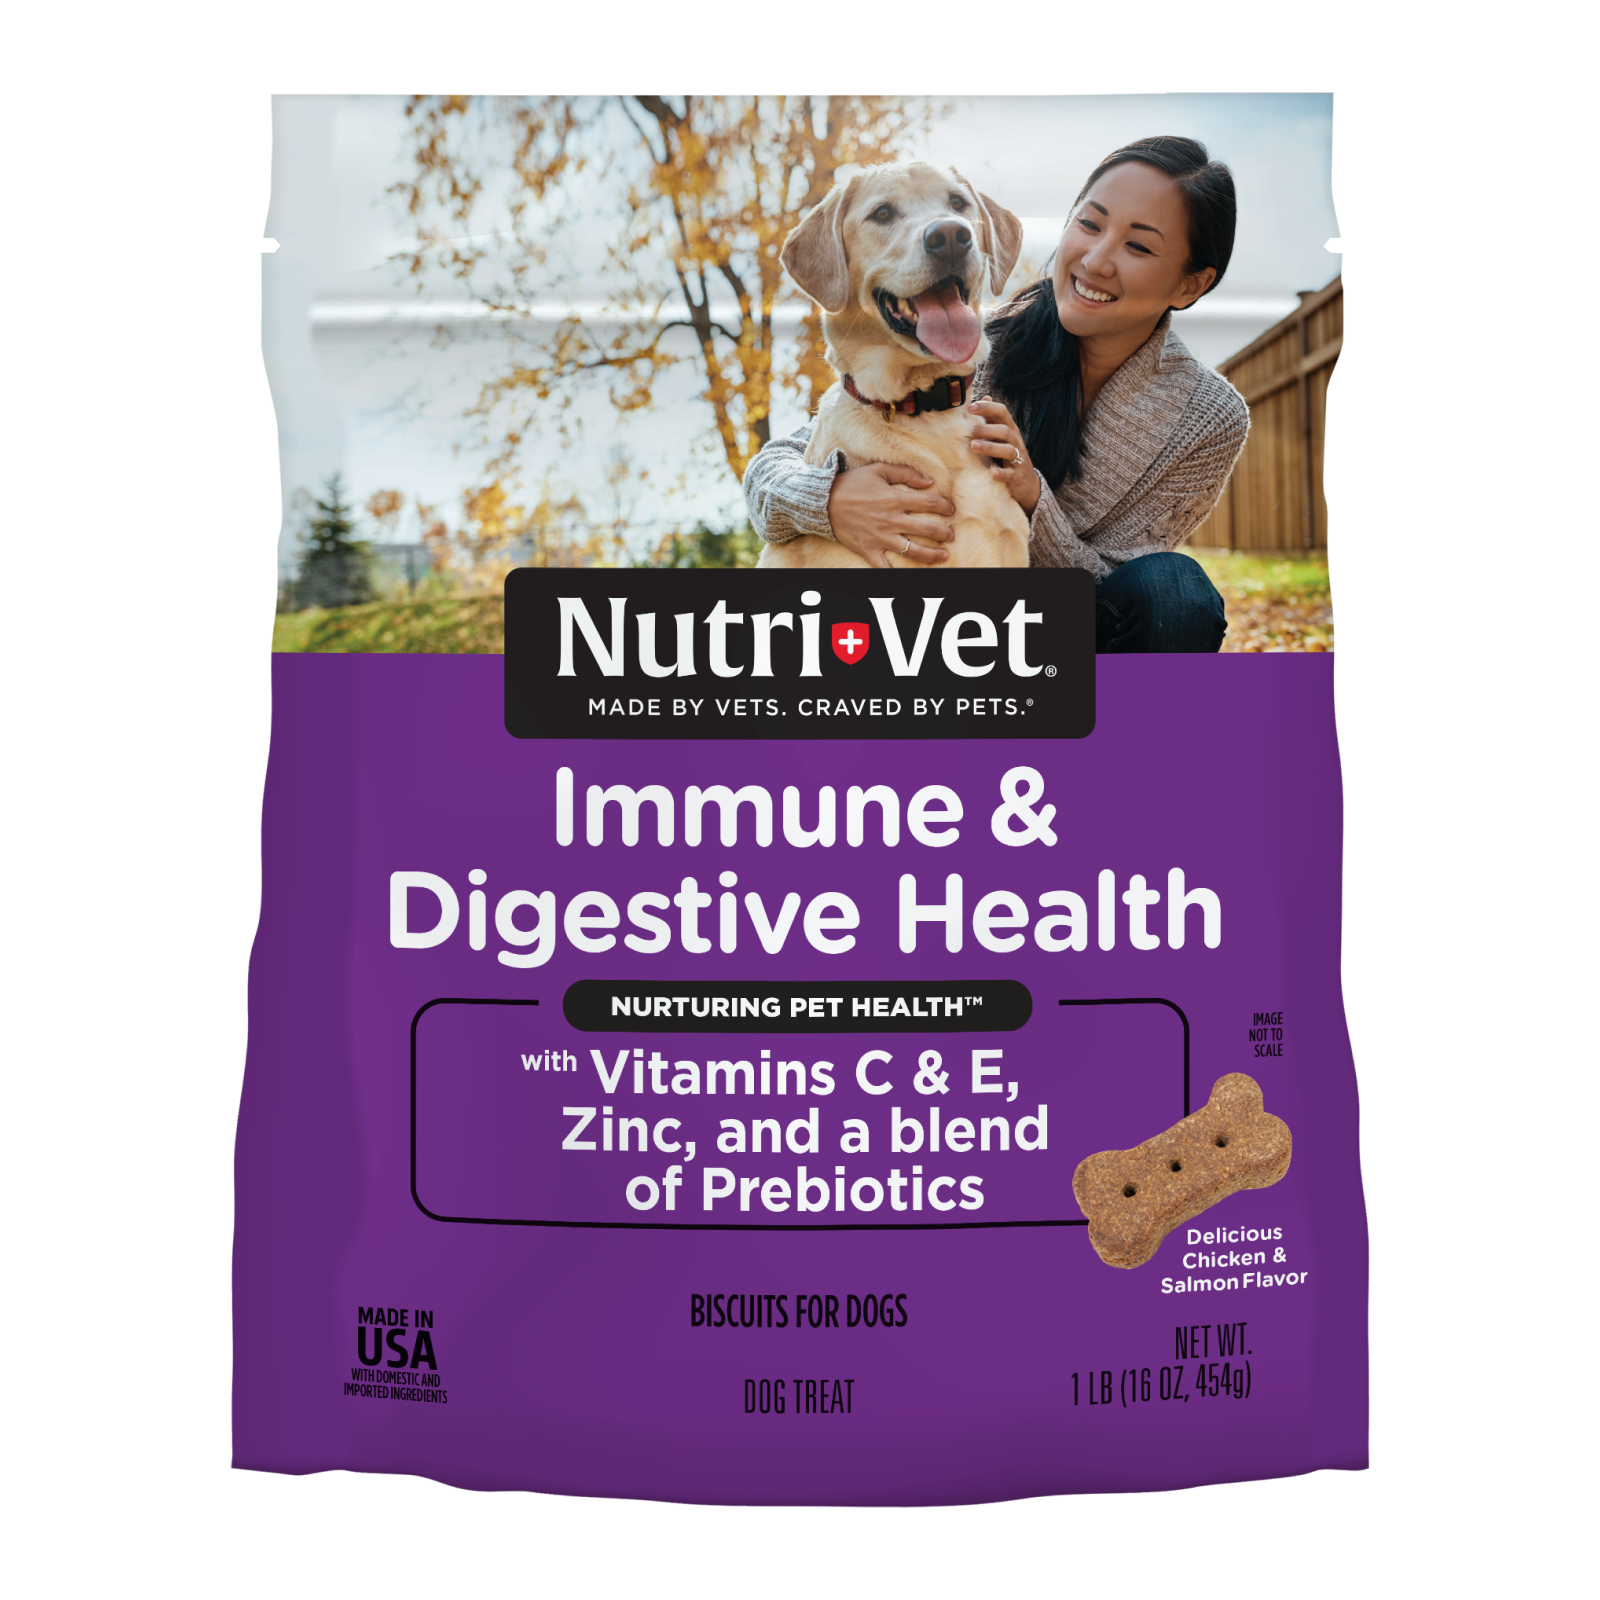 Immune & Digestive Health Functional Biscuits for Dogs front